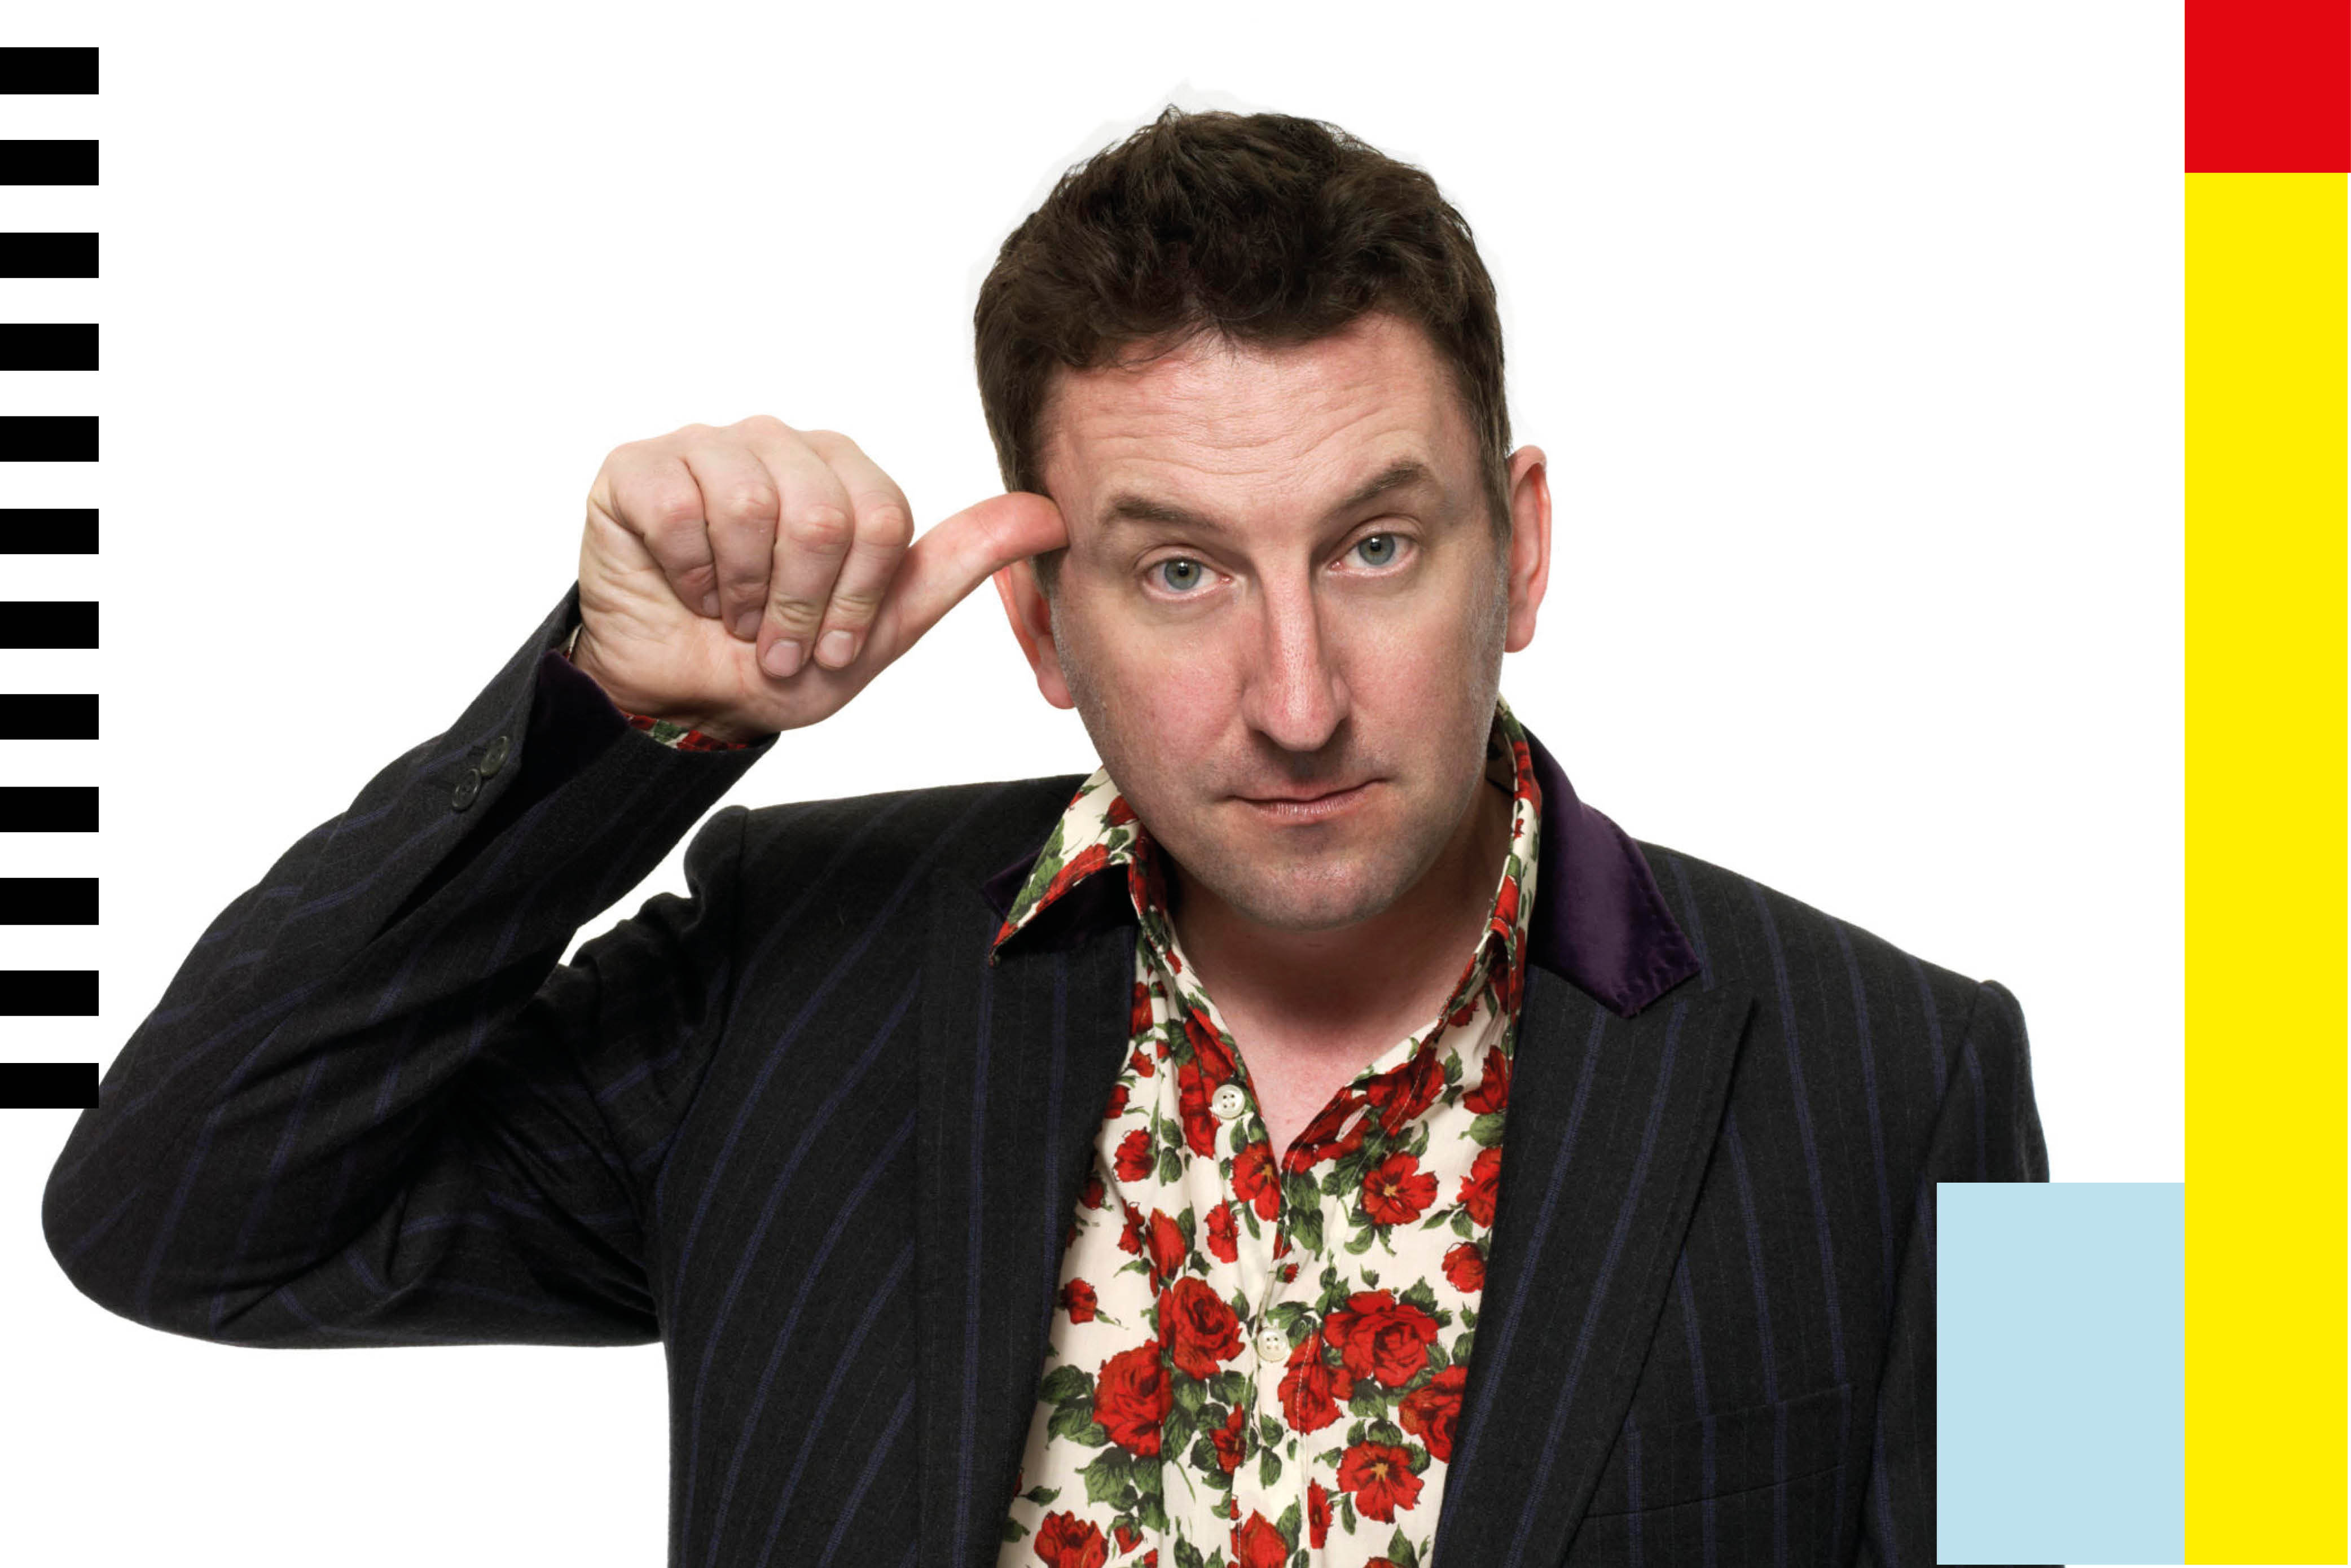 Lee Mack on the art of quick thinking